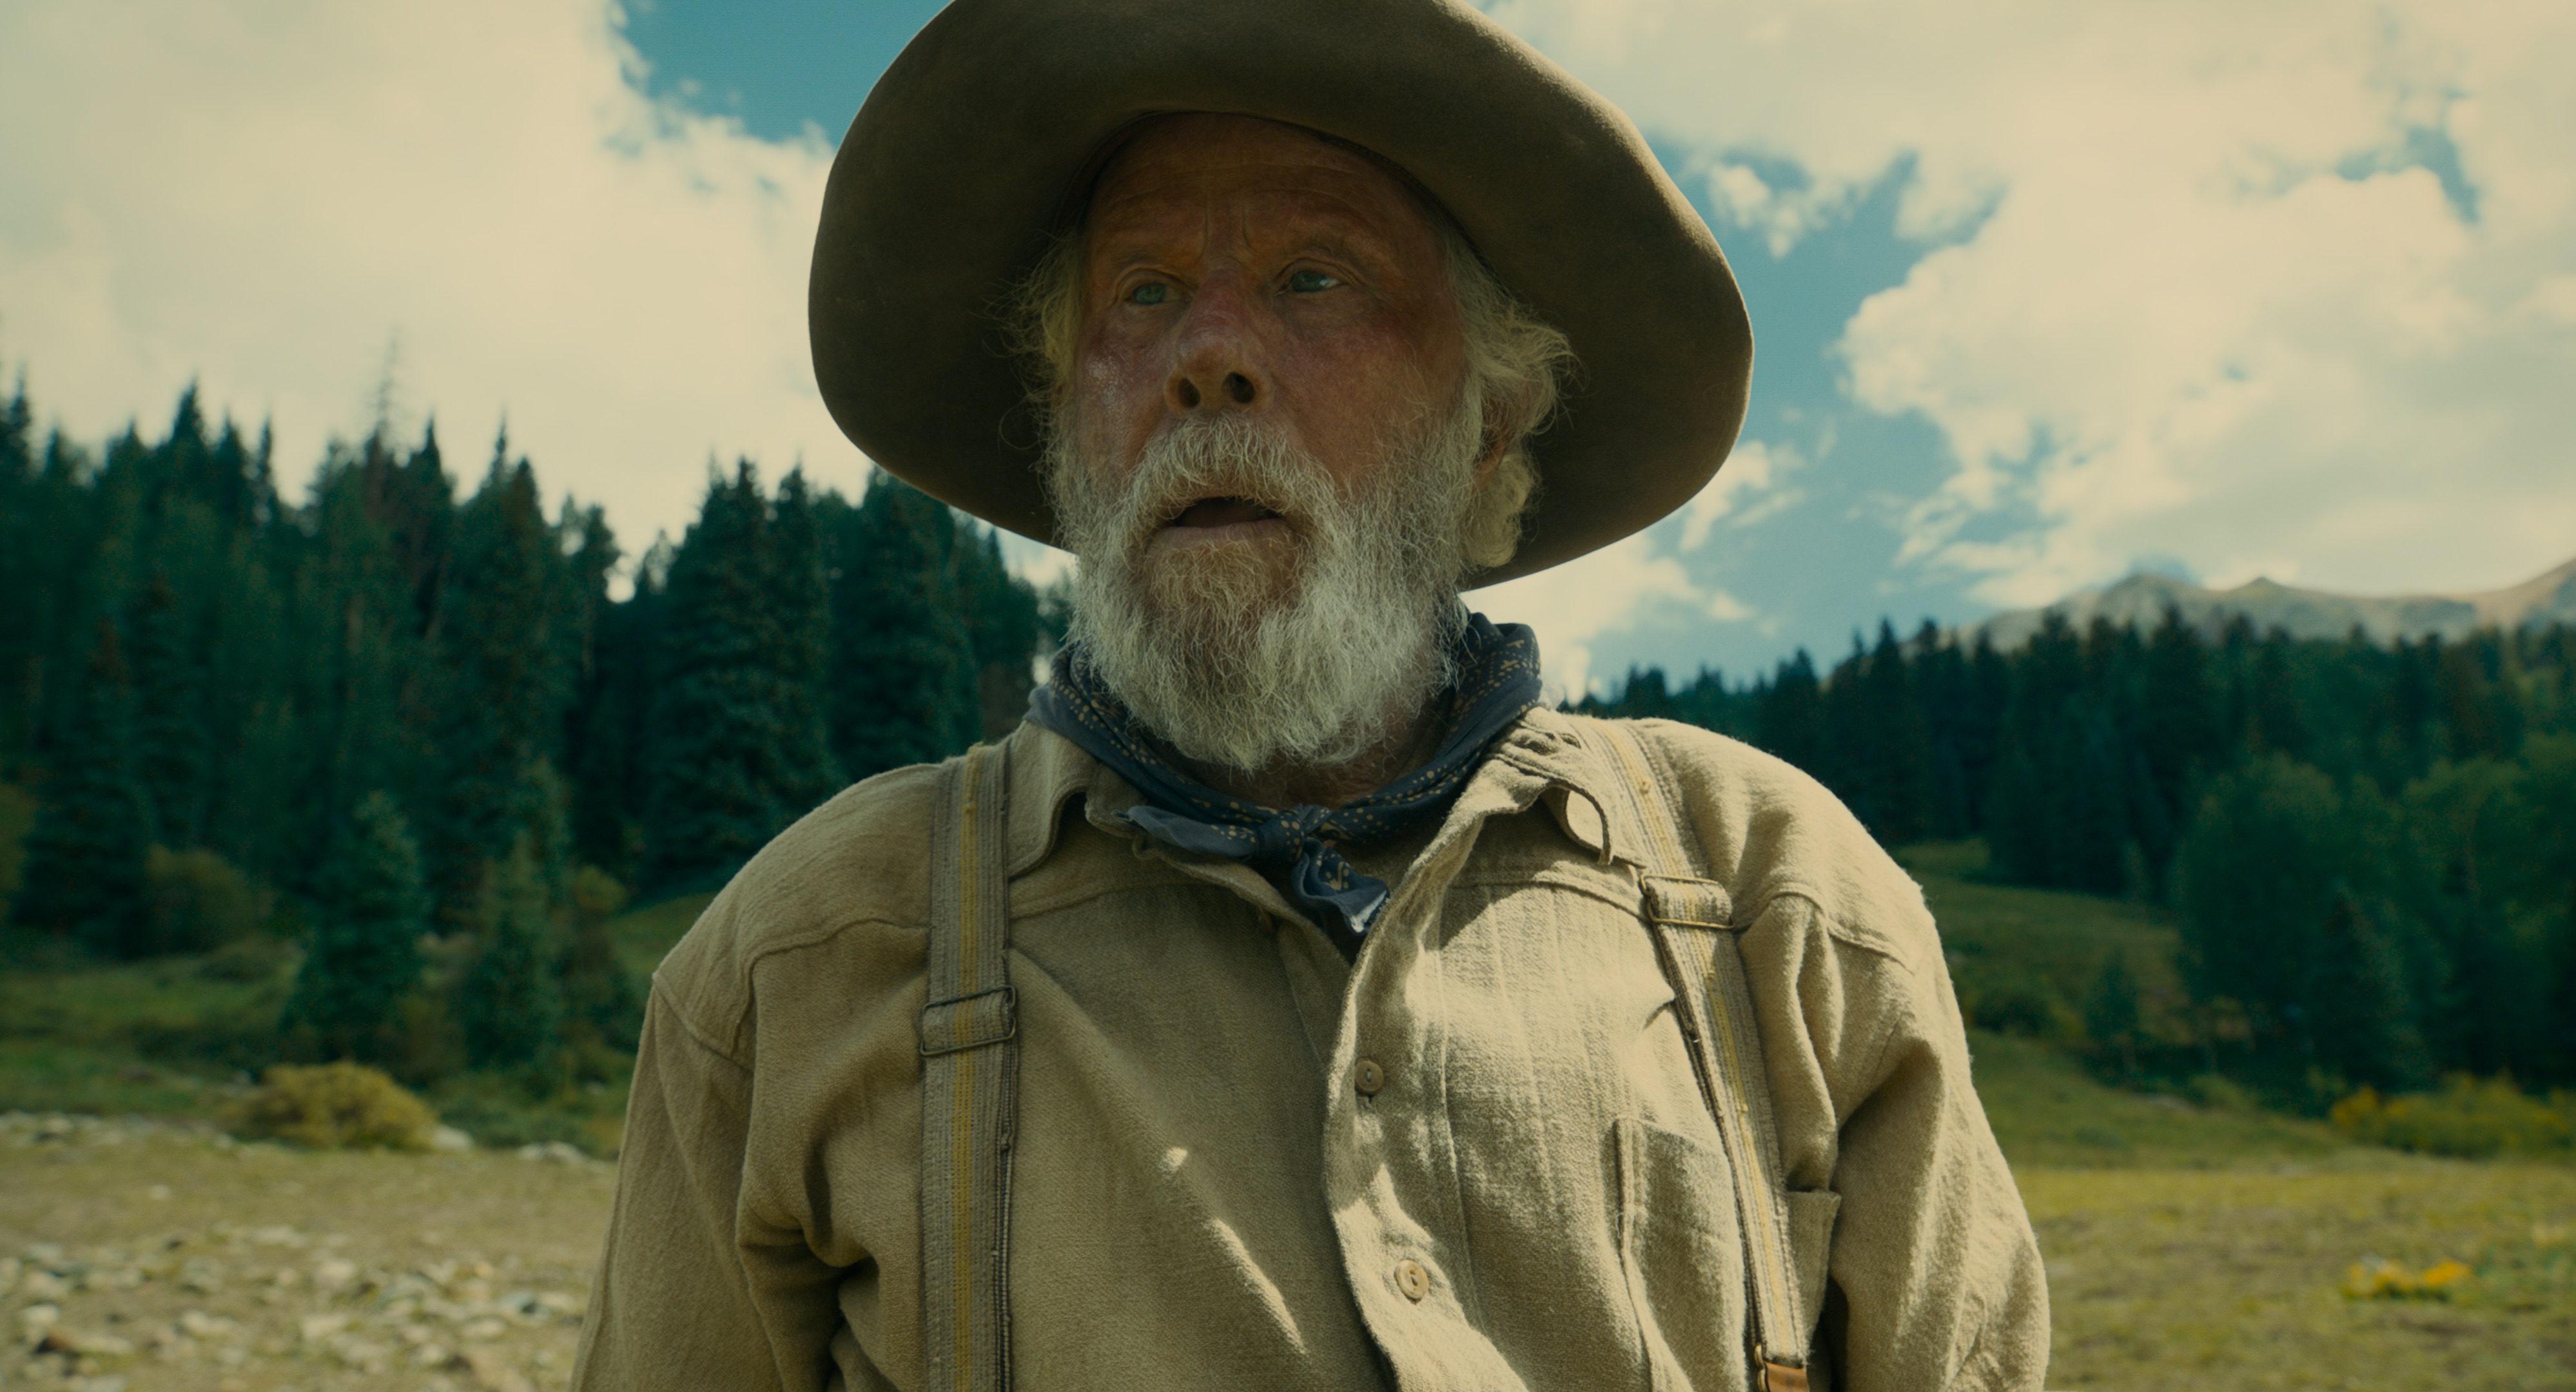 Review: 'The Ballad of Buster Scruggs' is an instant classic - The